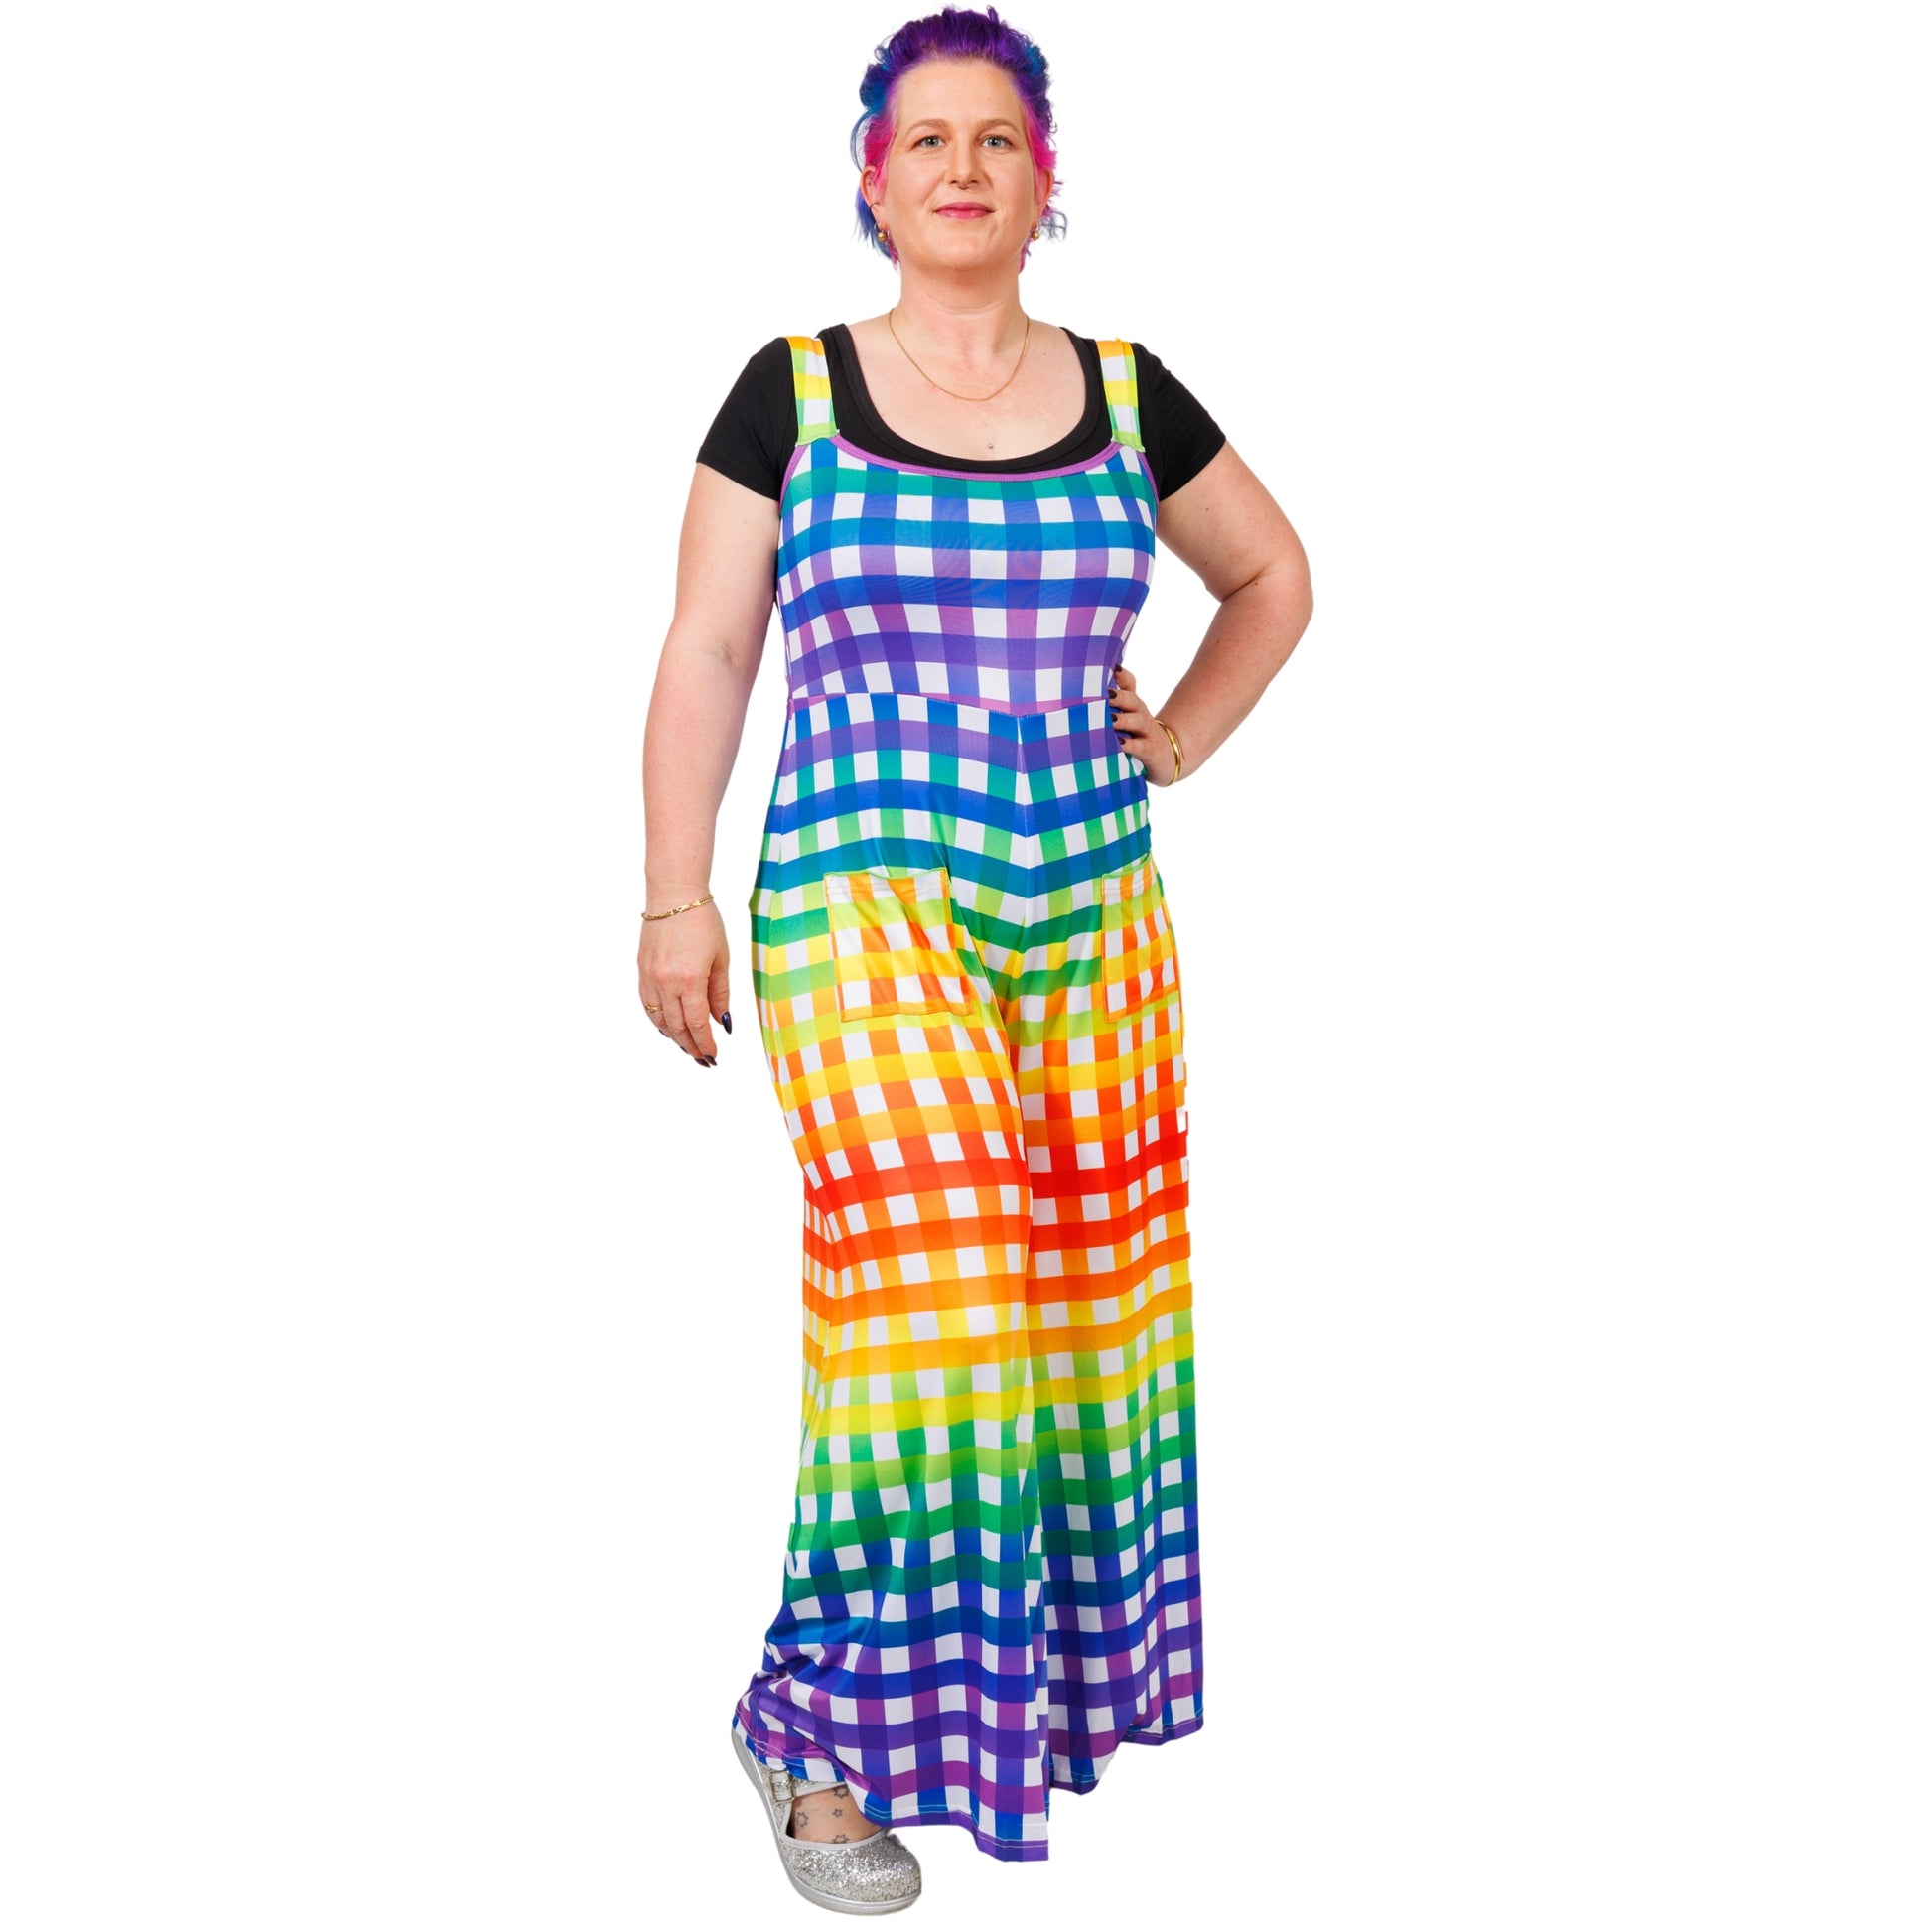 Rainbow Gingham Jumpsuit by RainbowsAndFairies.com.au (Check - Pride - Overalls - Wide Leg Pants - Kitsch - Rockabilly) - SKU: CL_JUMPS_GINGH_RBW - Pic-03